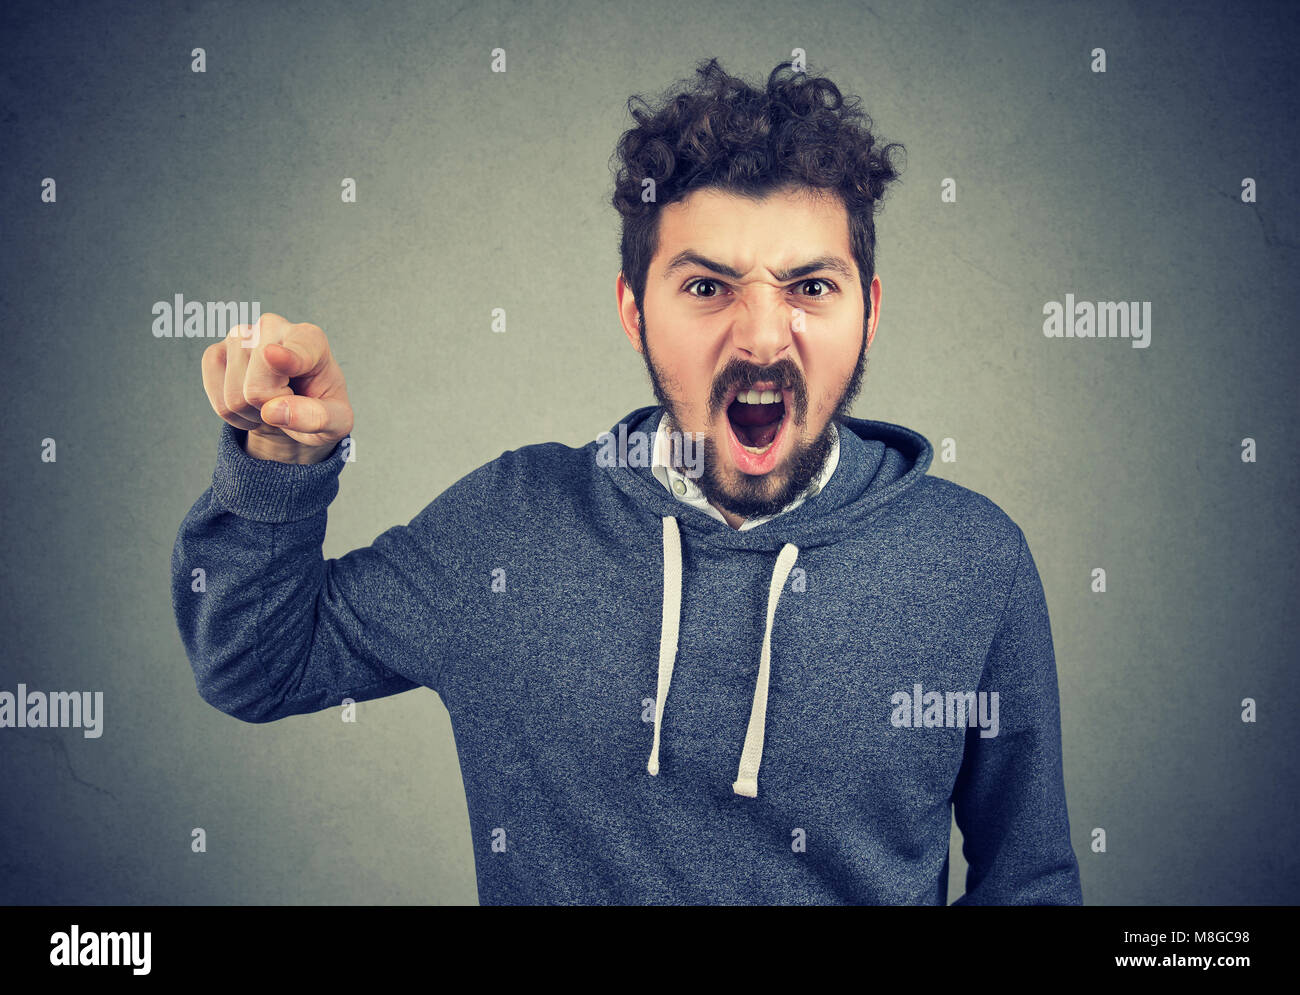 Angry young man accusing someone screaming Stock Photo